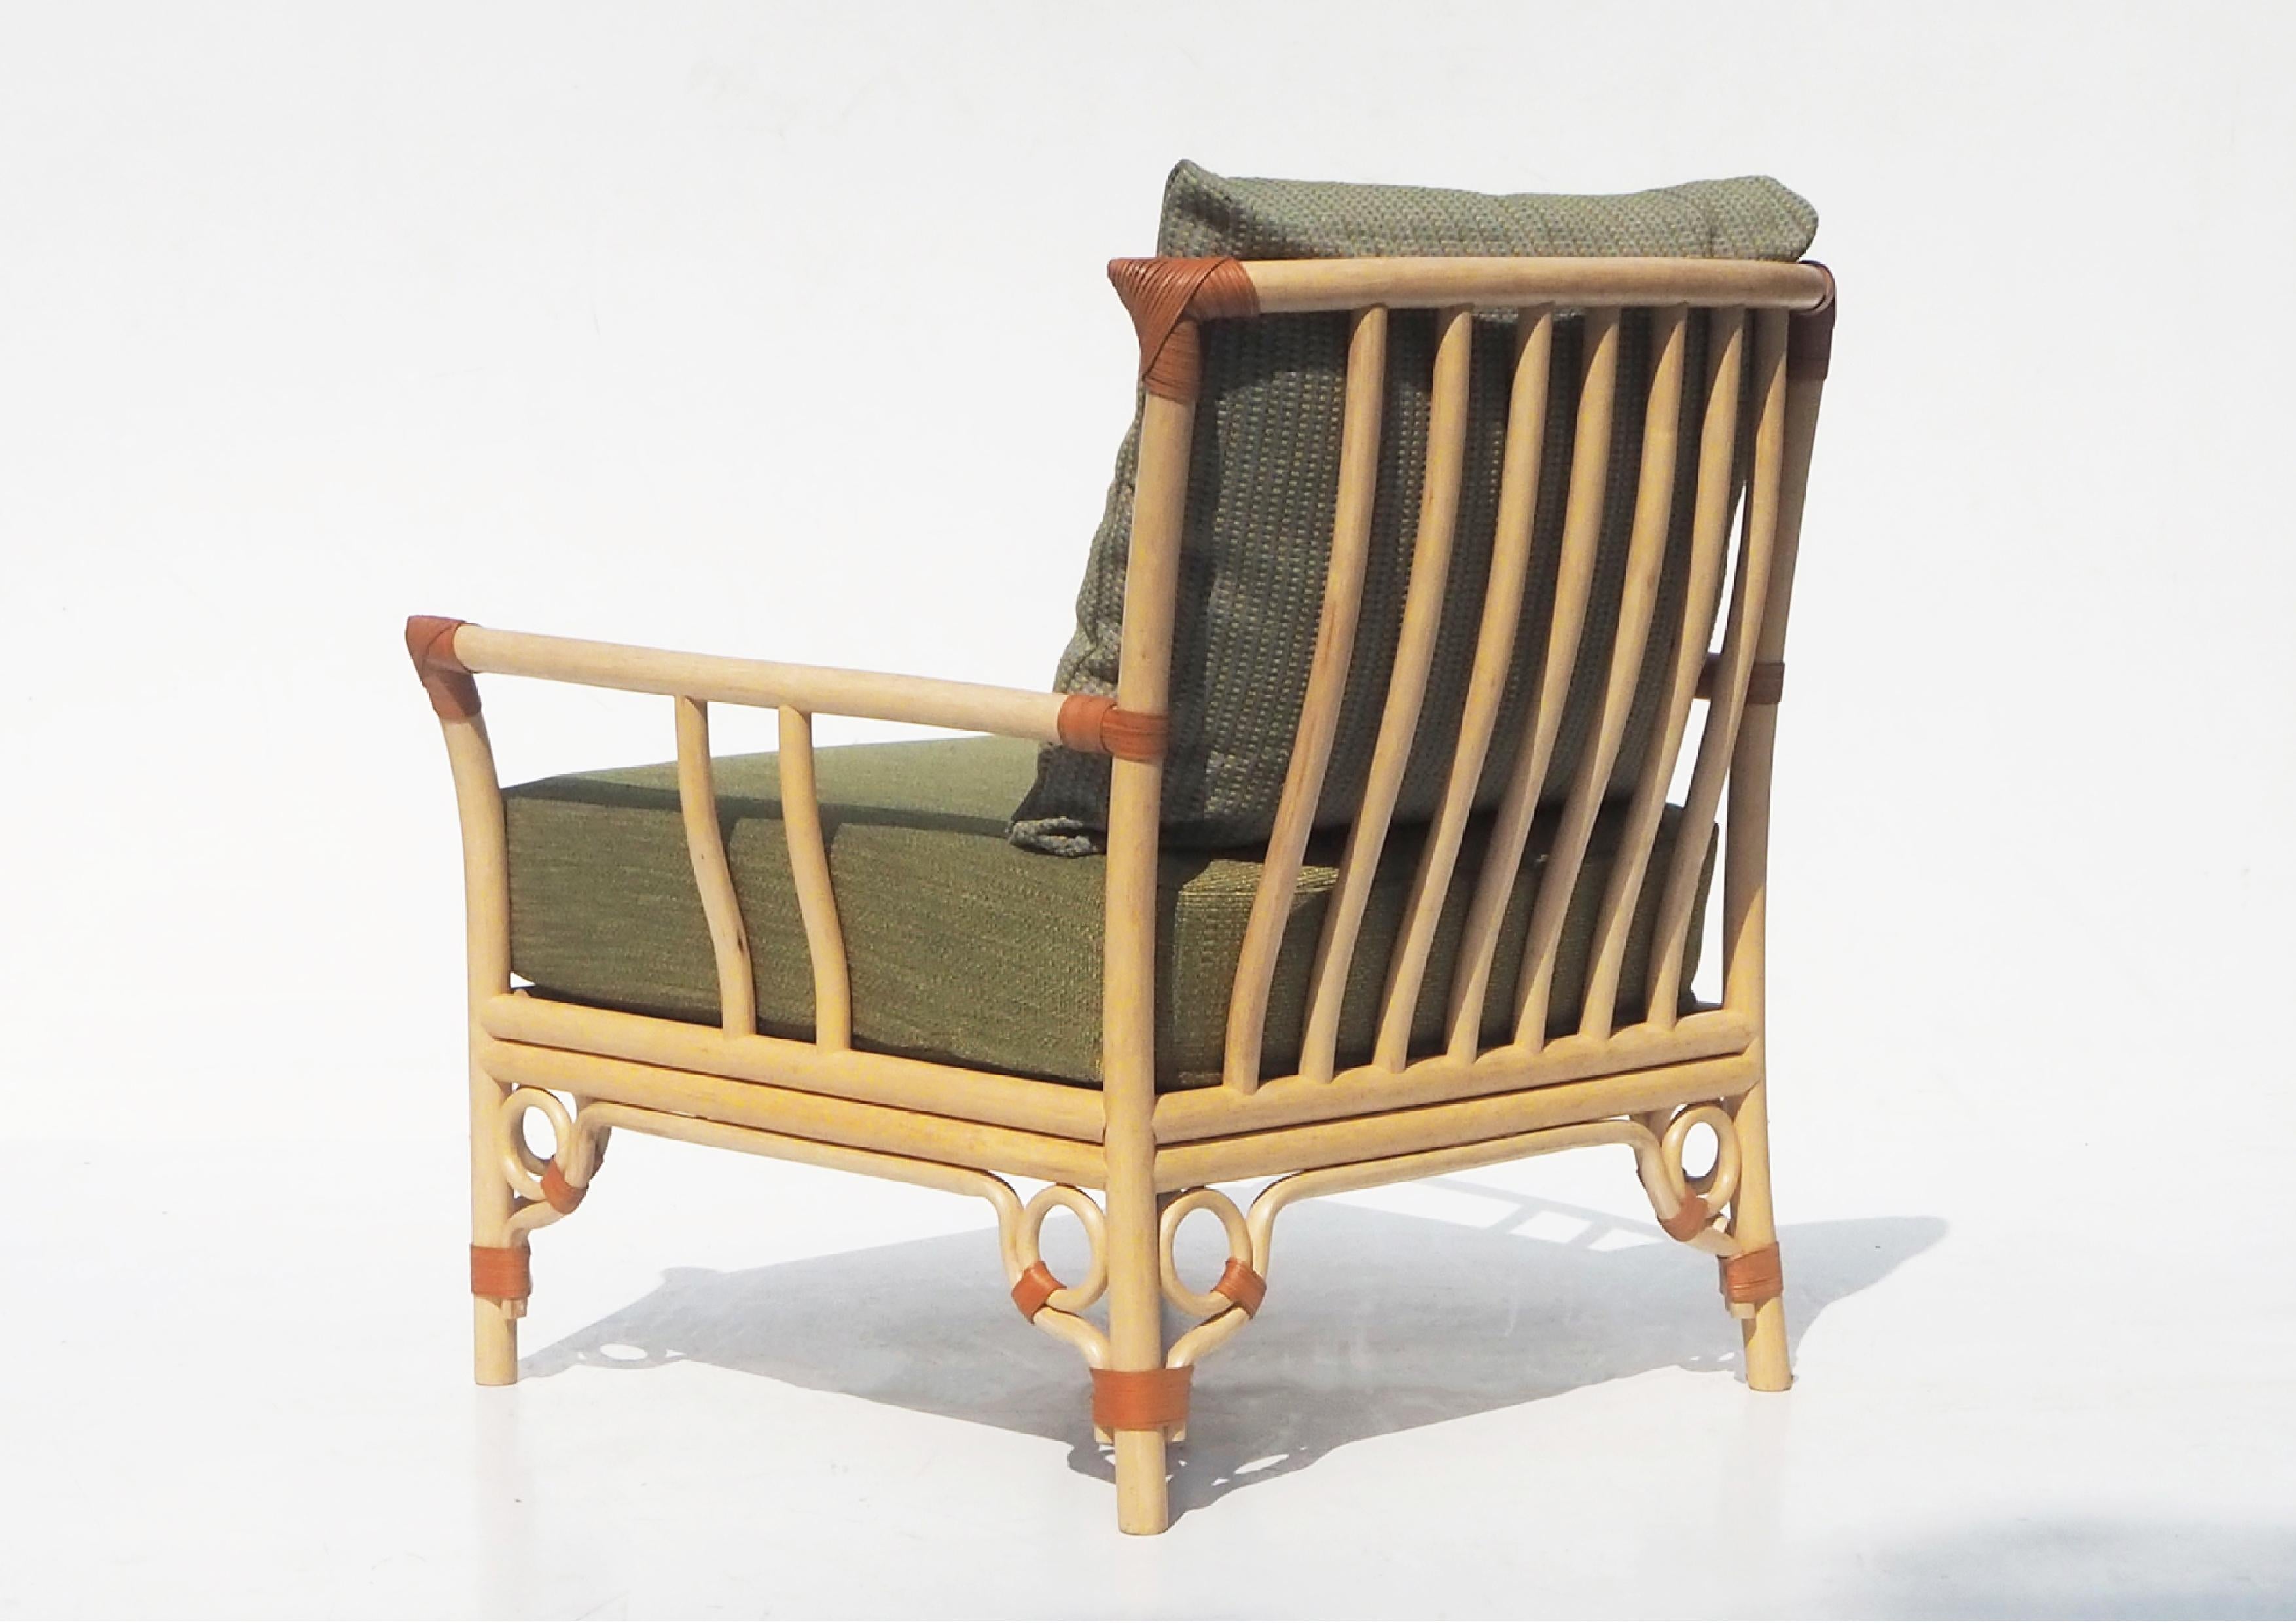 “Porta” armchair is the conjunction between the traditional and modern Chinese chair design. The armchair has been redesigned with respect to tradition by choosing aged old rattan joint techniques unlike industrial rattan works which use screws.